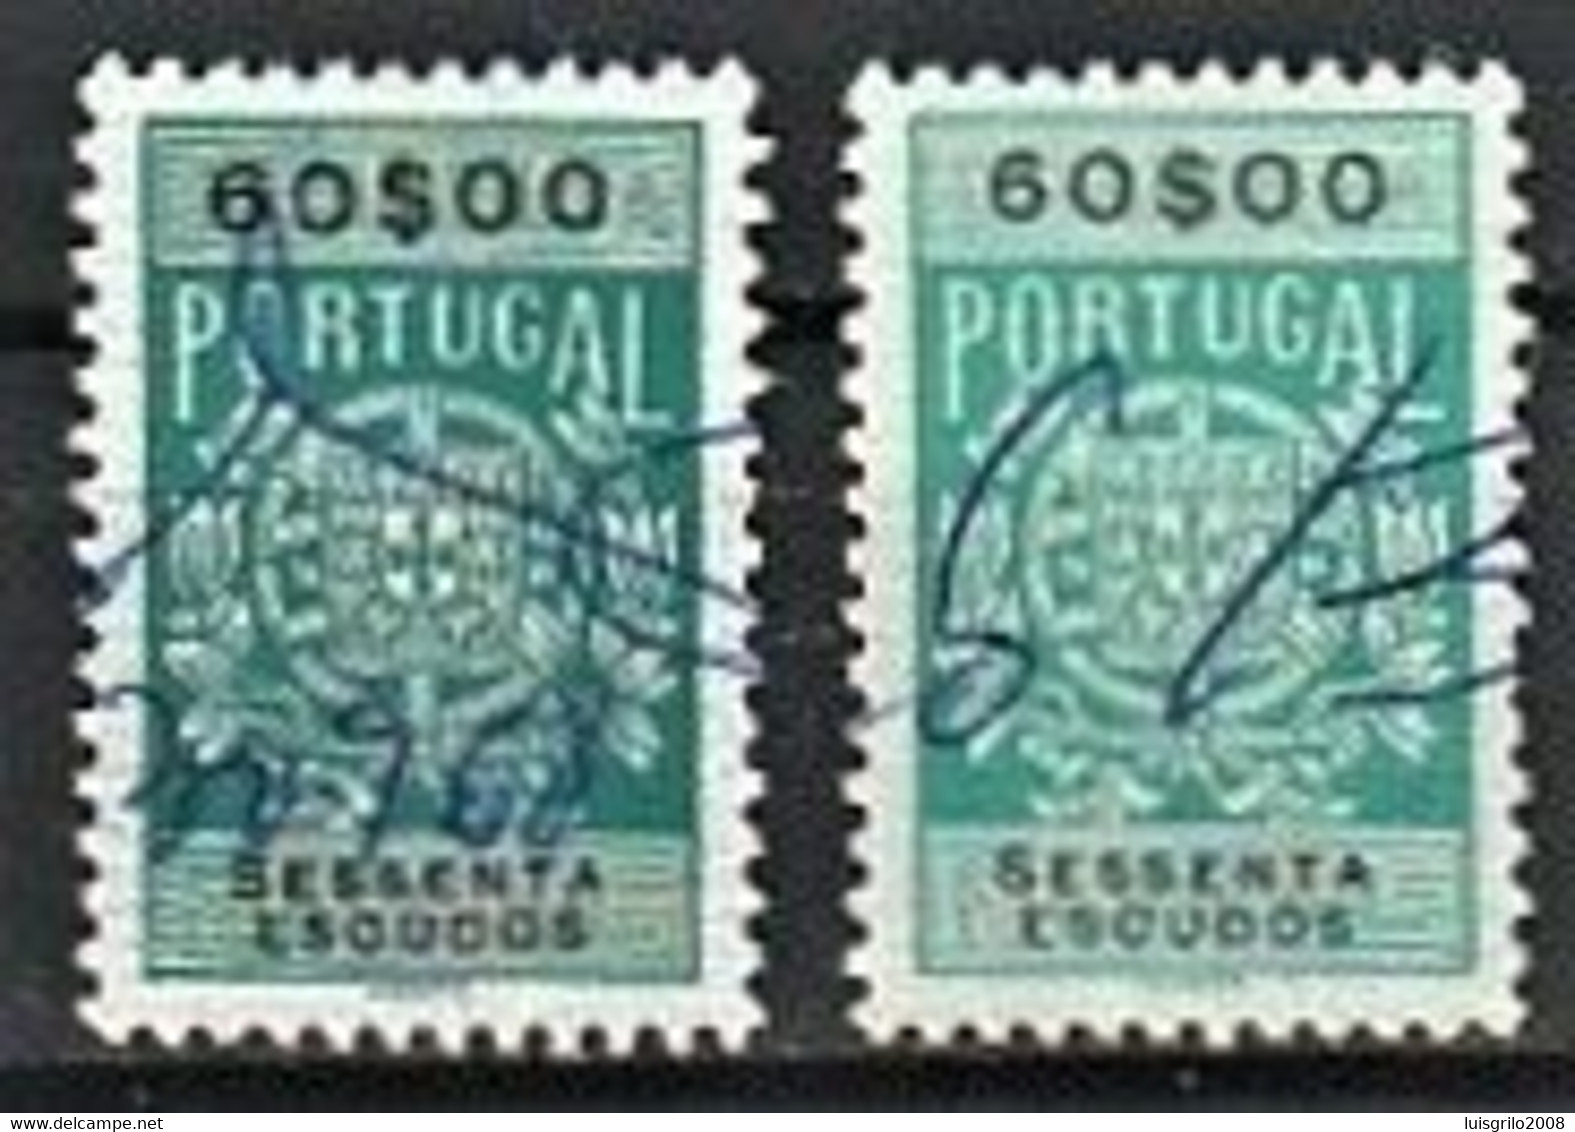 Fiscal/ Revenue, Portugal 1940 - Estampilha Fiscal -|- 60$00 - COLOR VARIANT - Is The Stamp Of The Right - Gebraucht